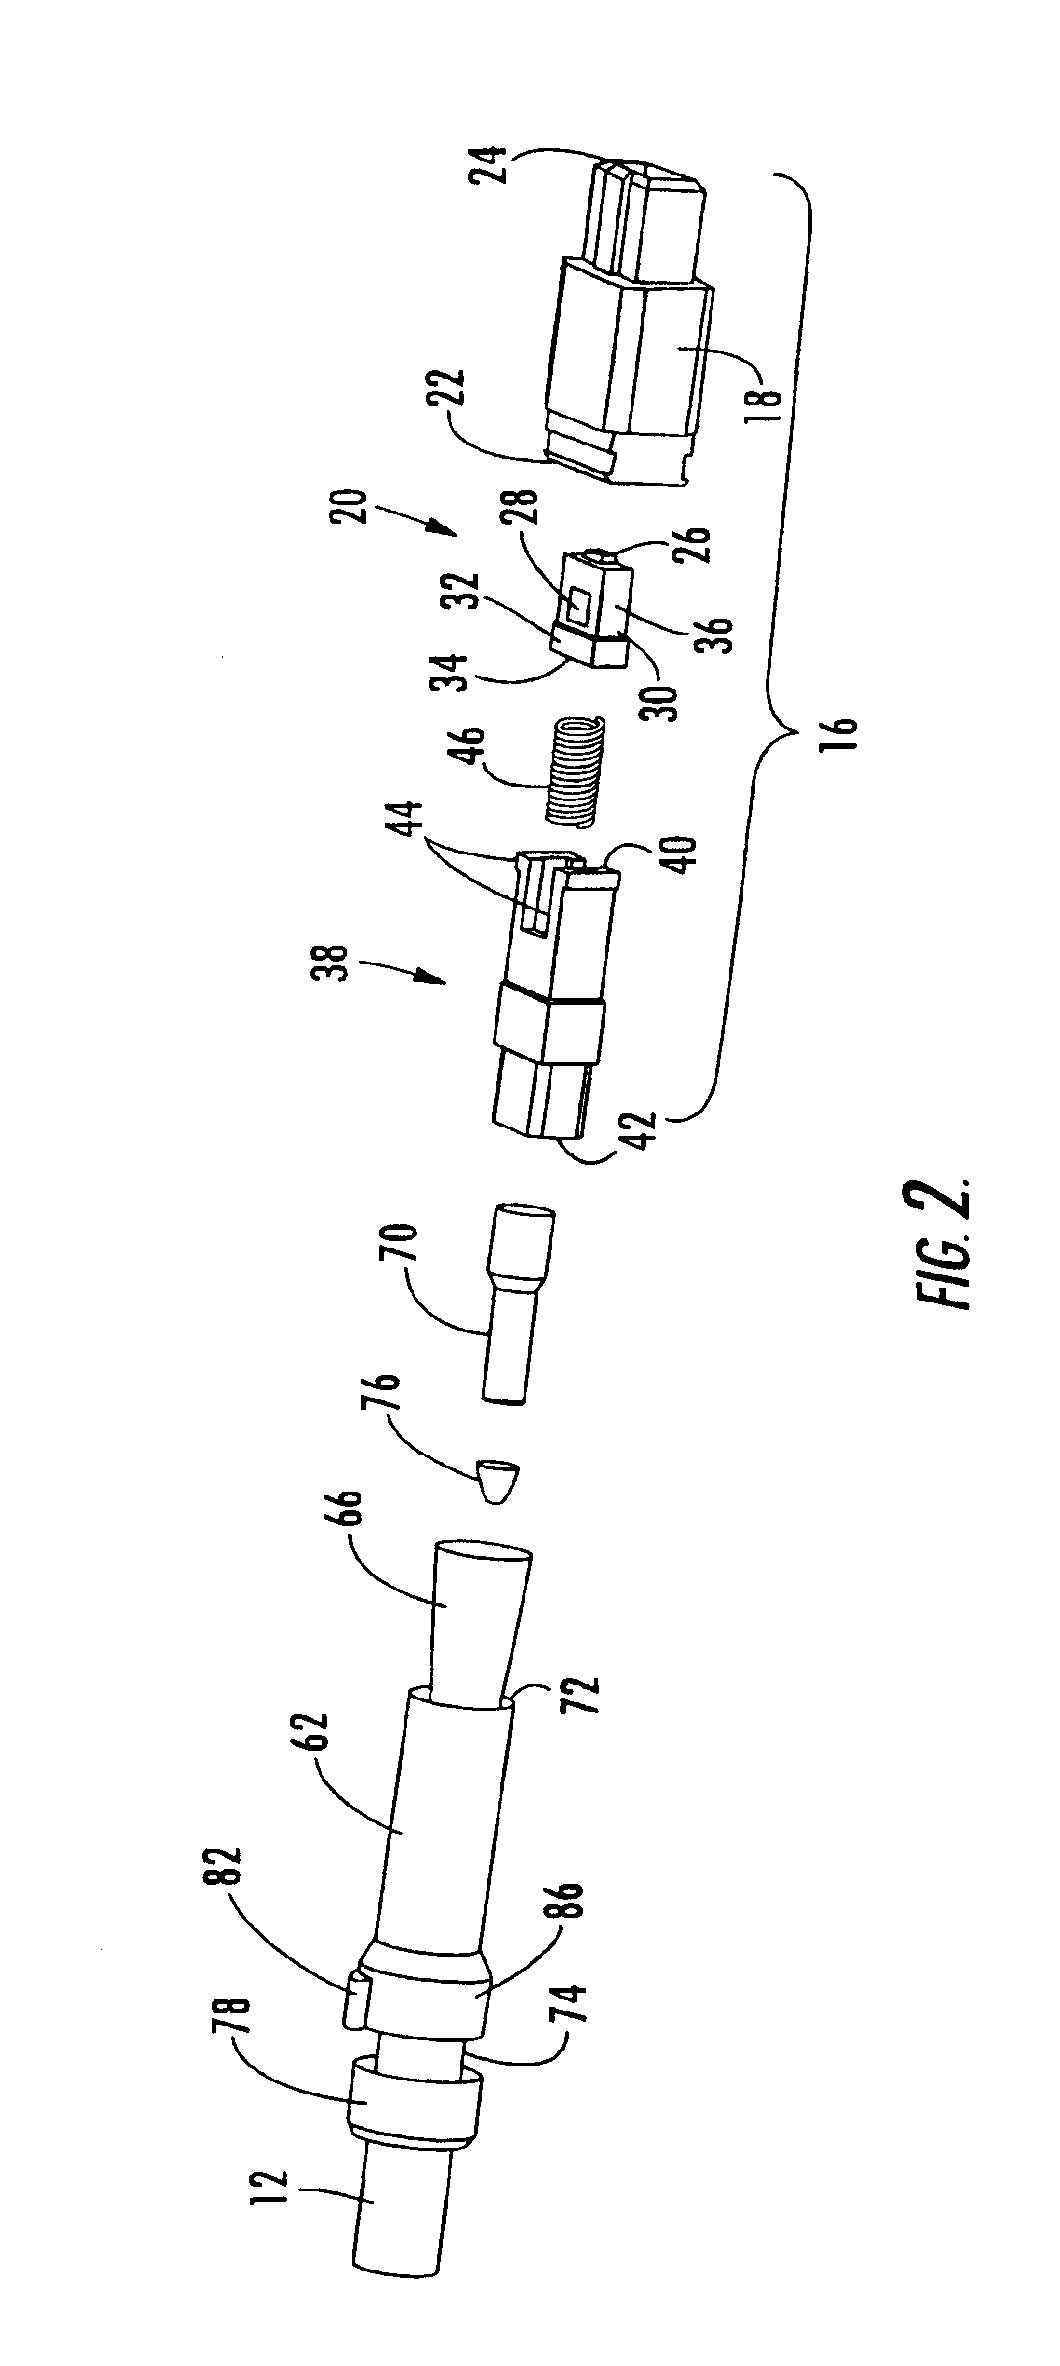 Fiber optic plug and receptacle assembly